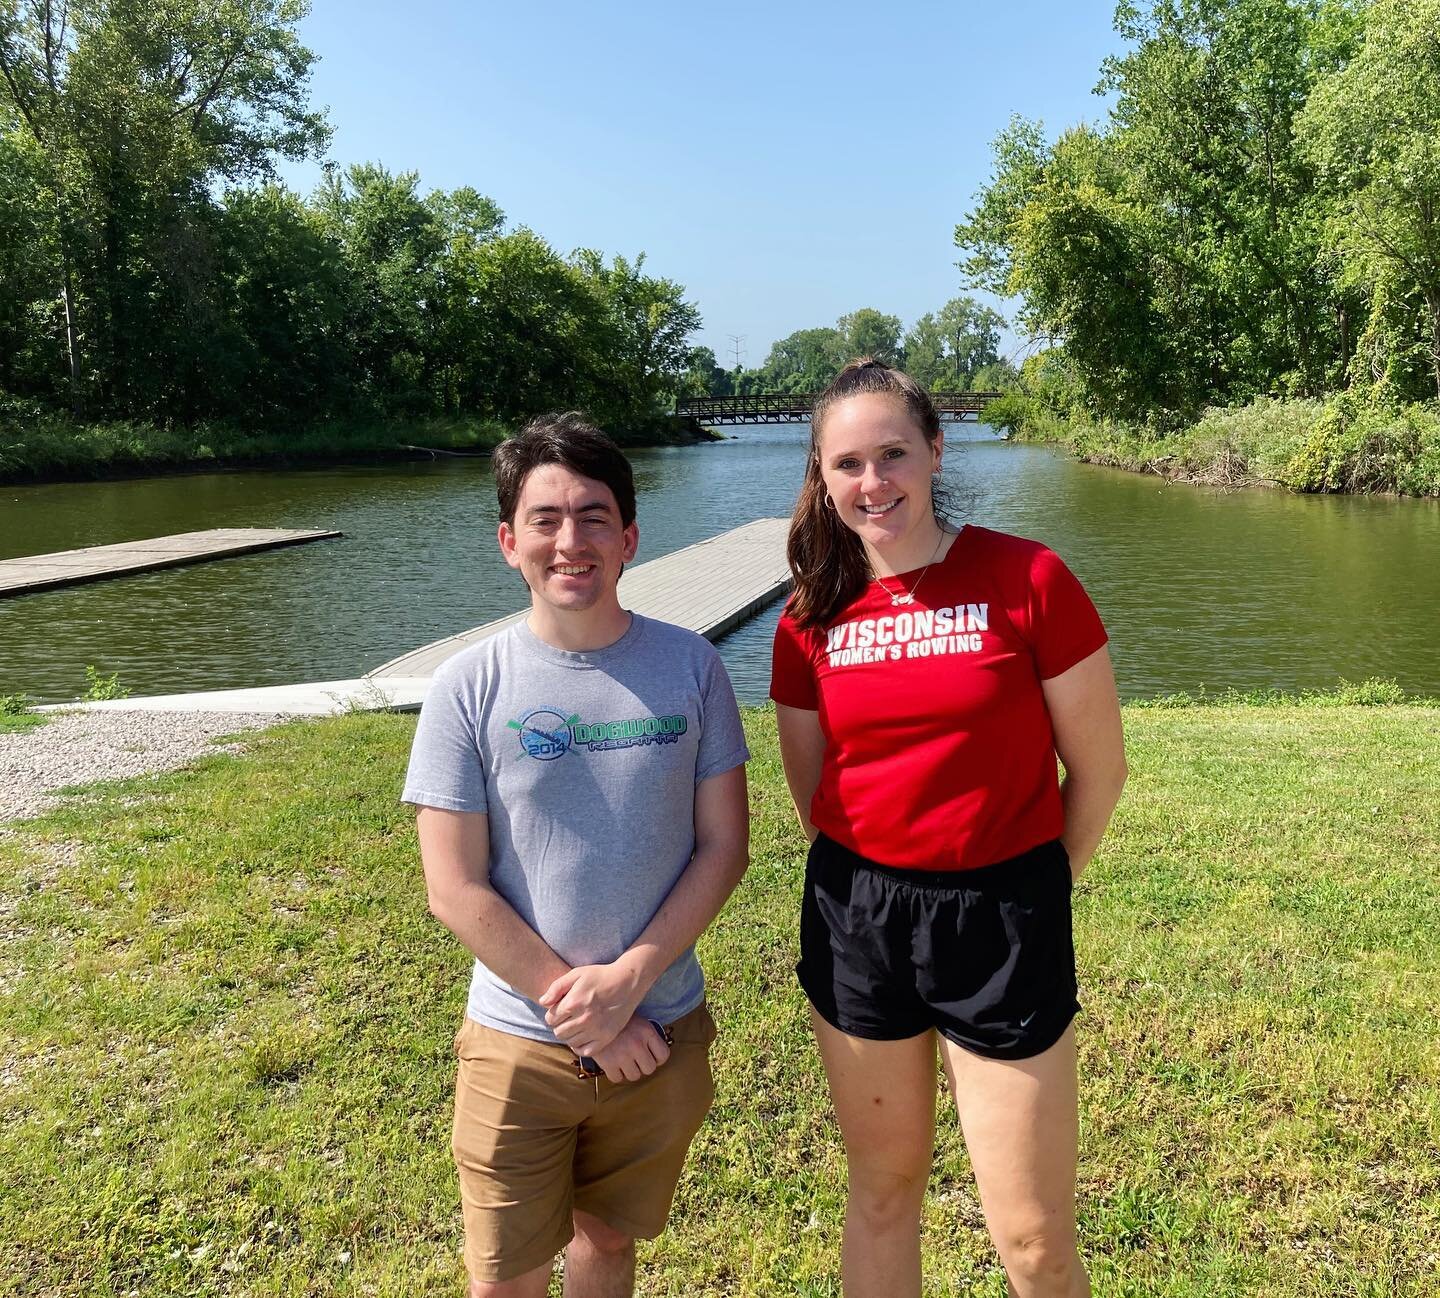 Meet our new assistant coaches!!! Andrew Grant coxed for SLRC way back in high school before coxing at Syracuse 💪then coaching at Le Moyne College. These days he works as a cartographer 🗺. Carissa Witthuhn Rowed at the University of Wisconsin-Madis